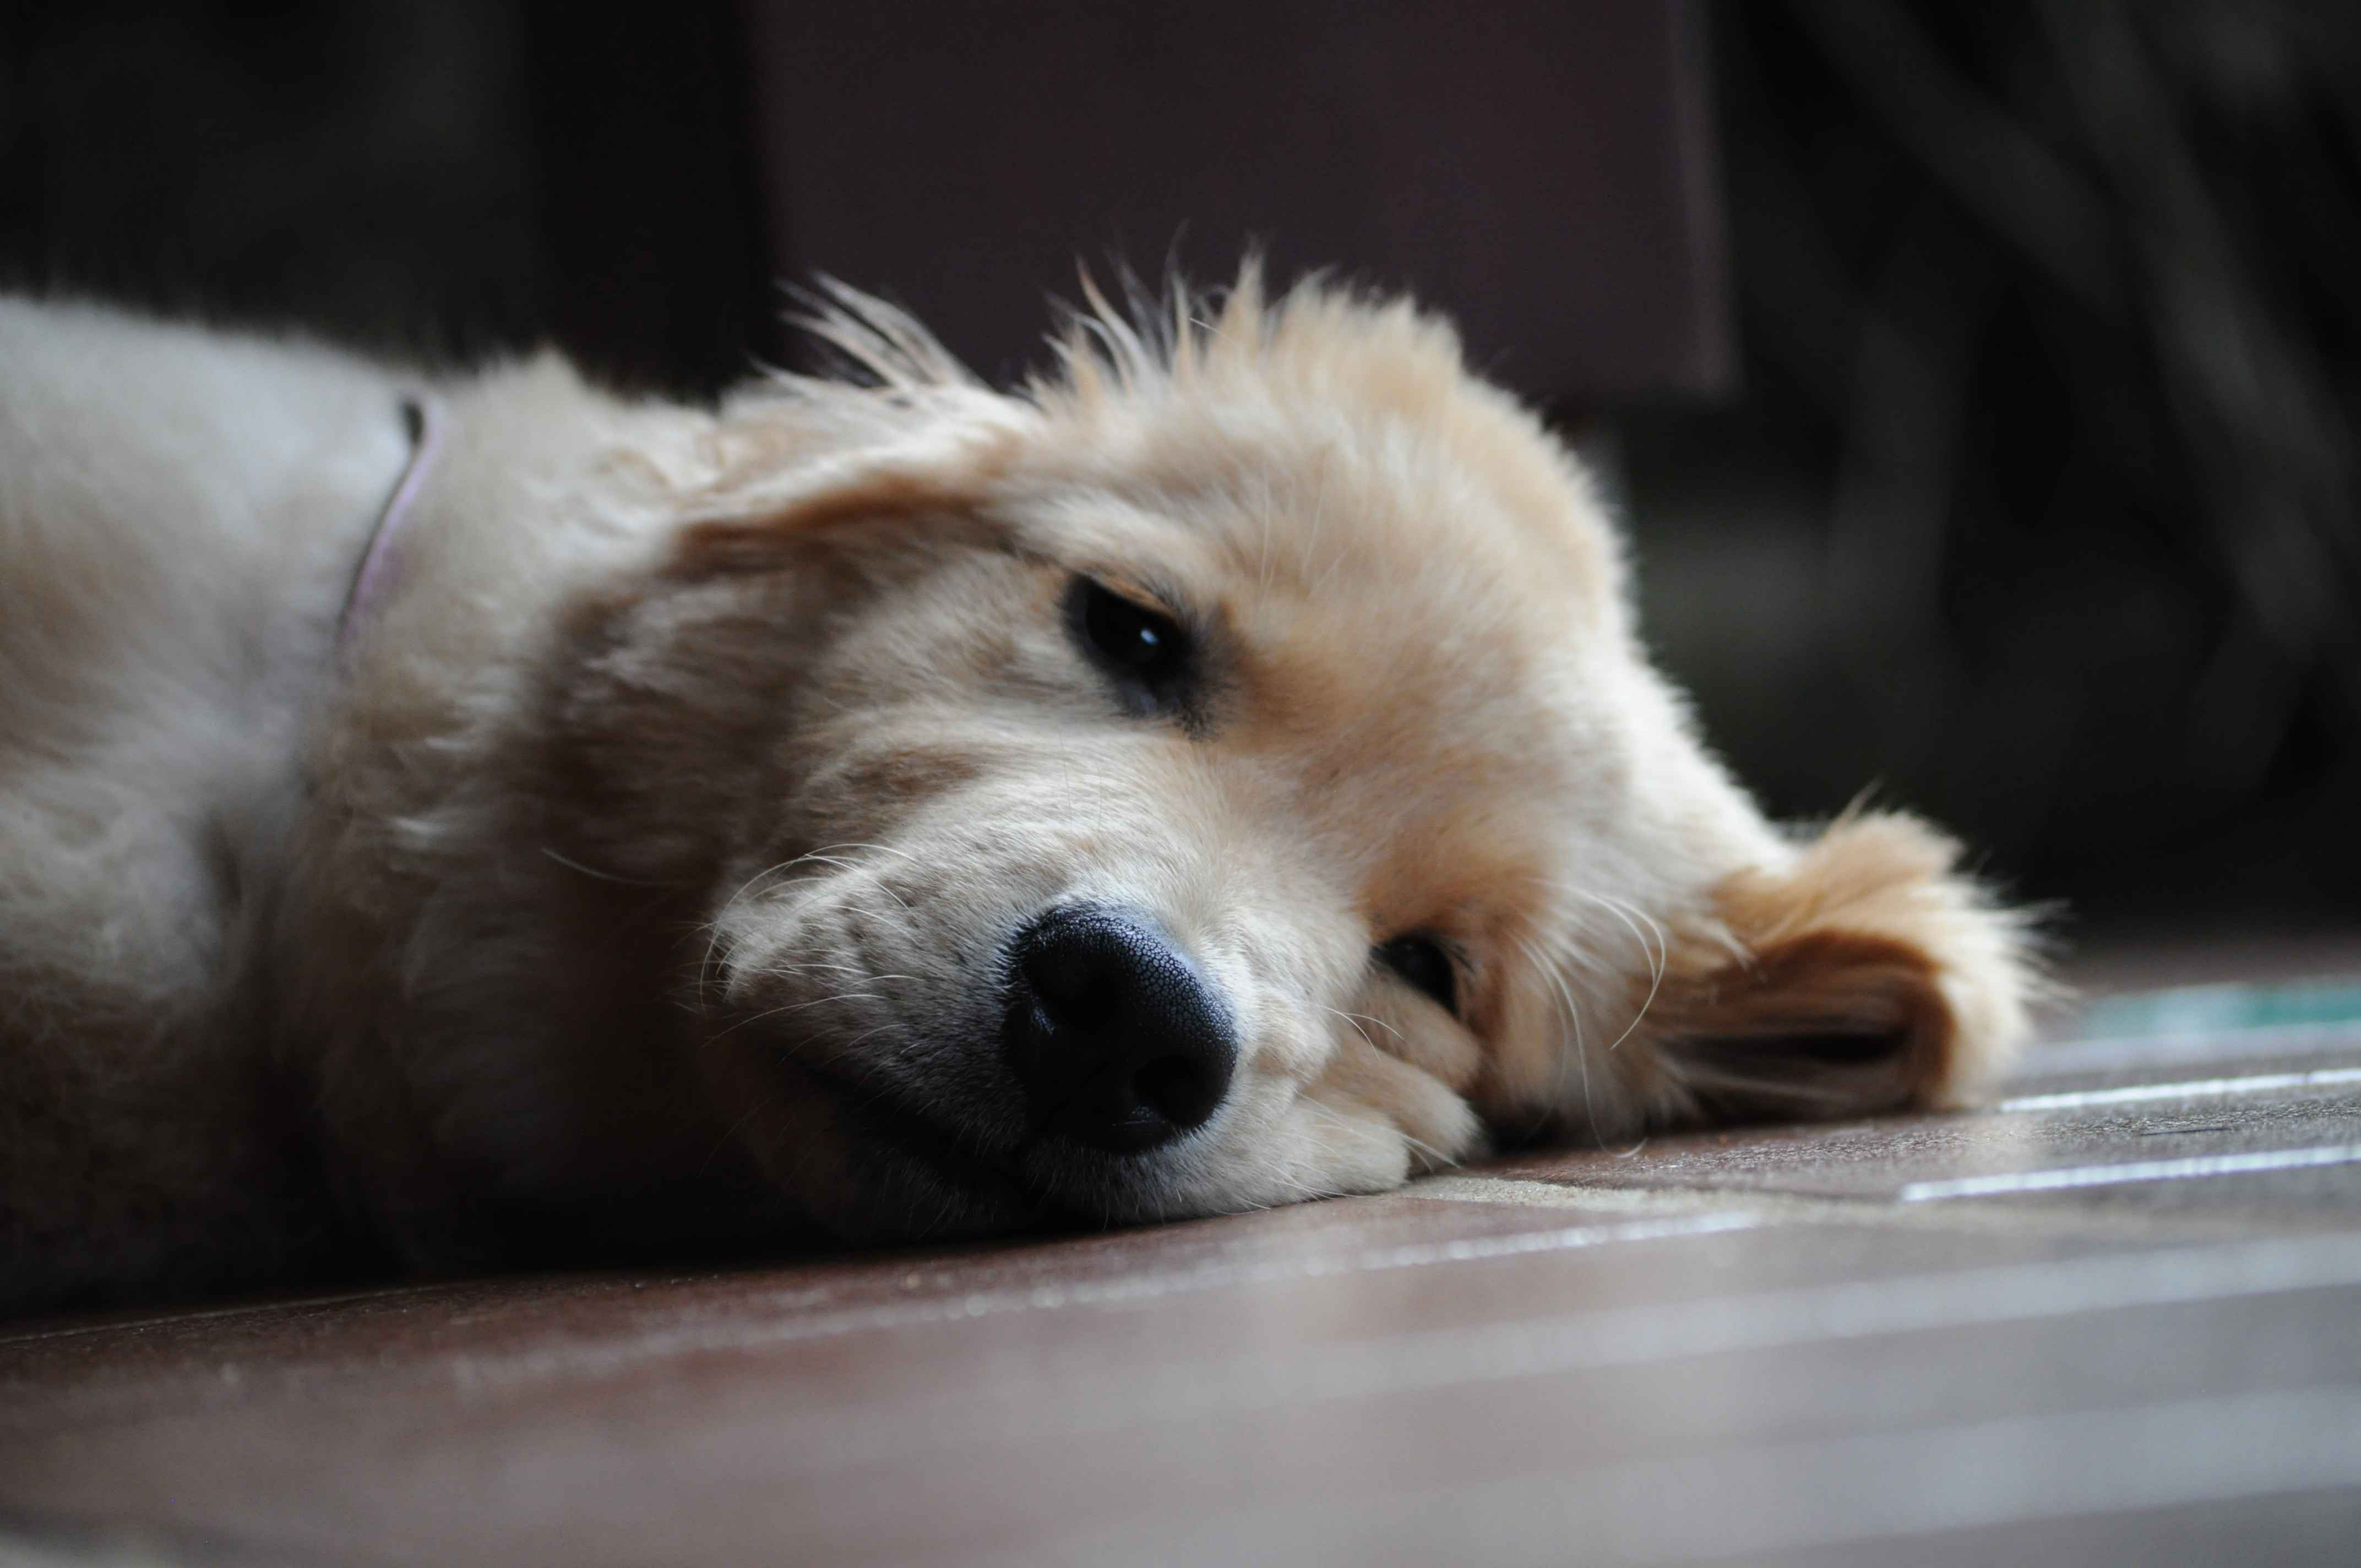 Golden Retriever Puppy Training: Tips for Socializing and Adjusting to Household Noises and Activities